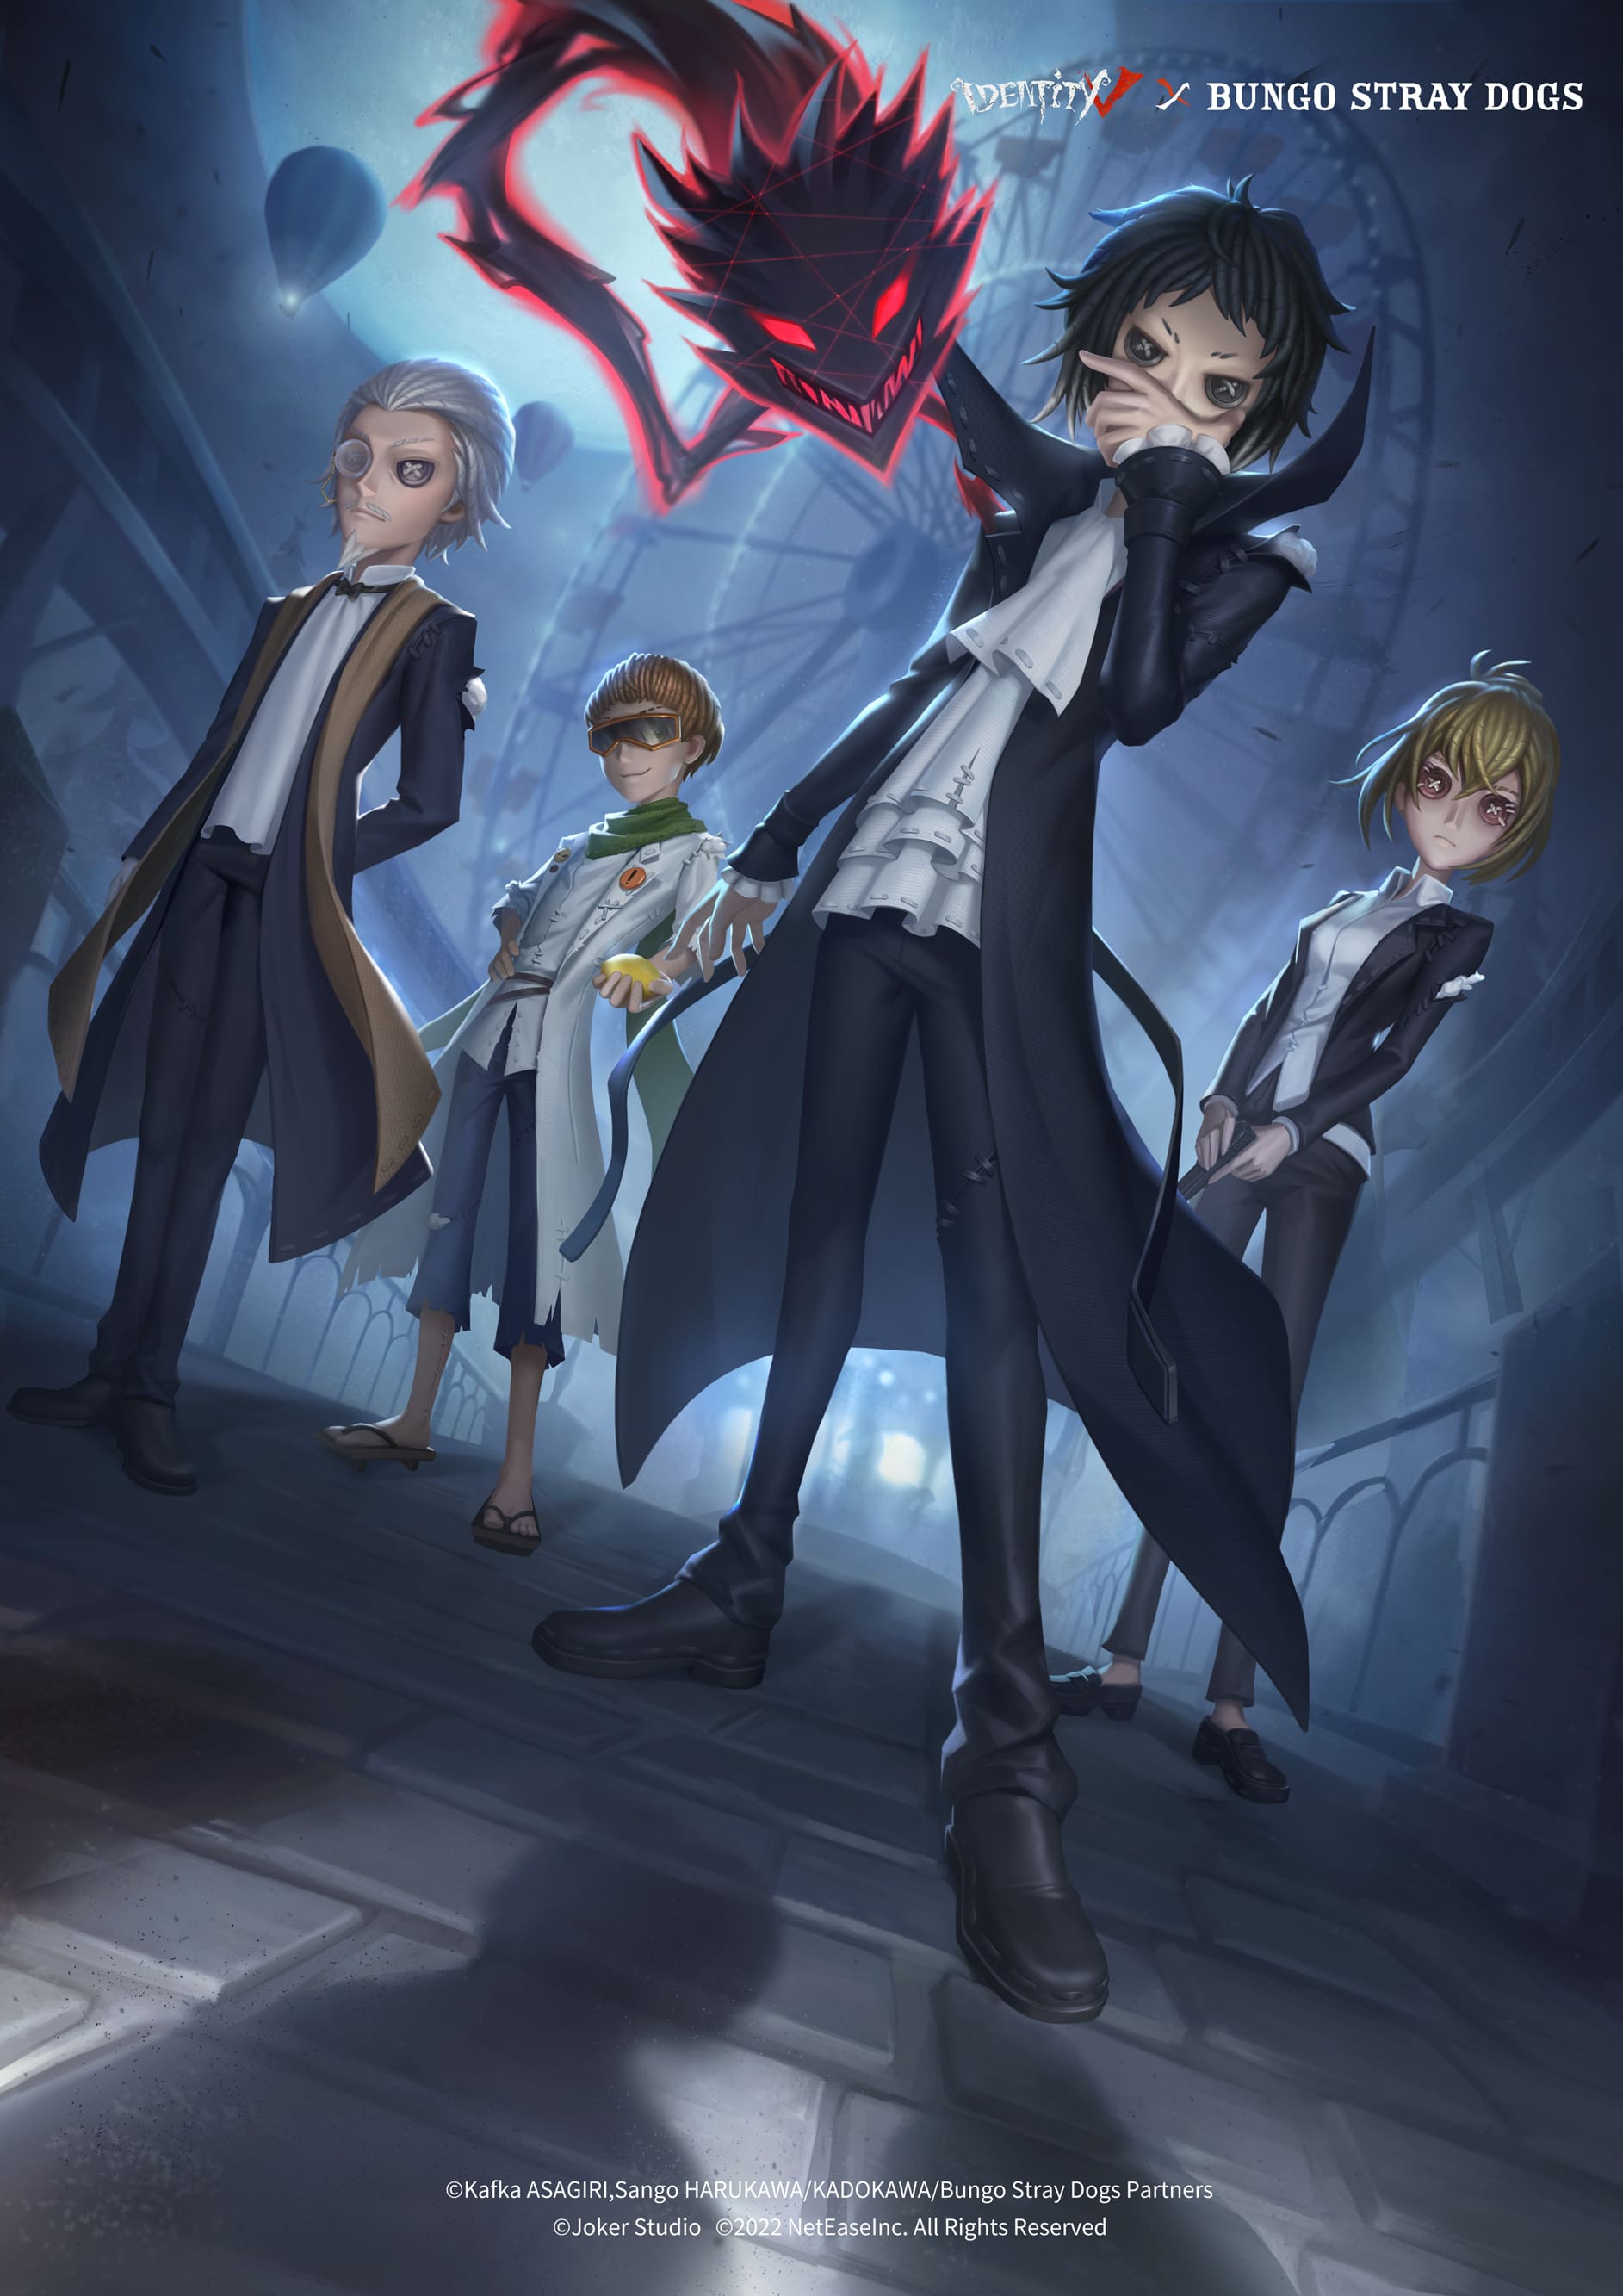 Identity V is hosting their first crossover with popular anime